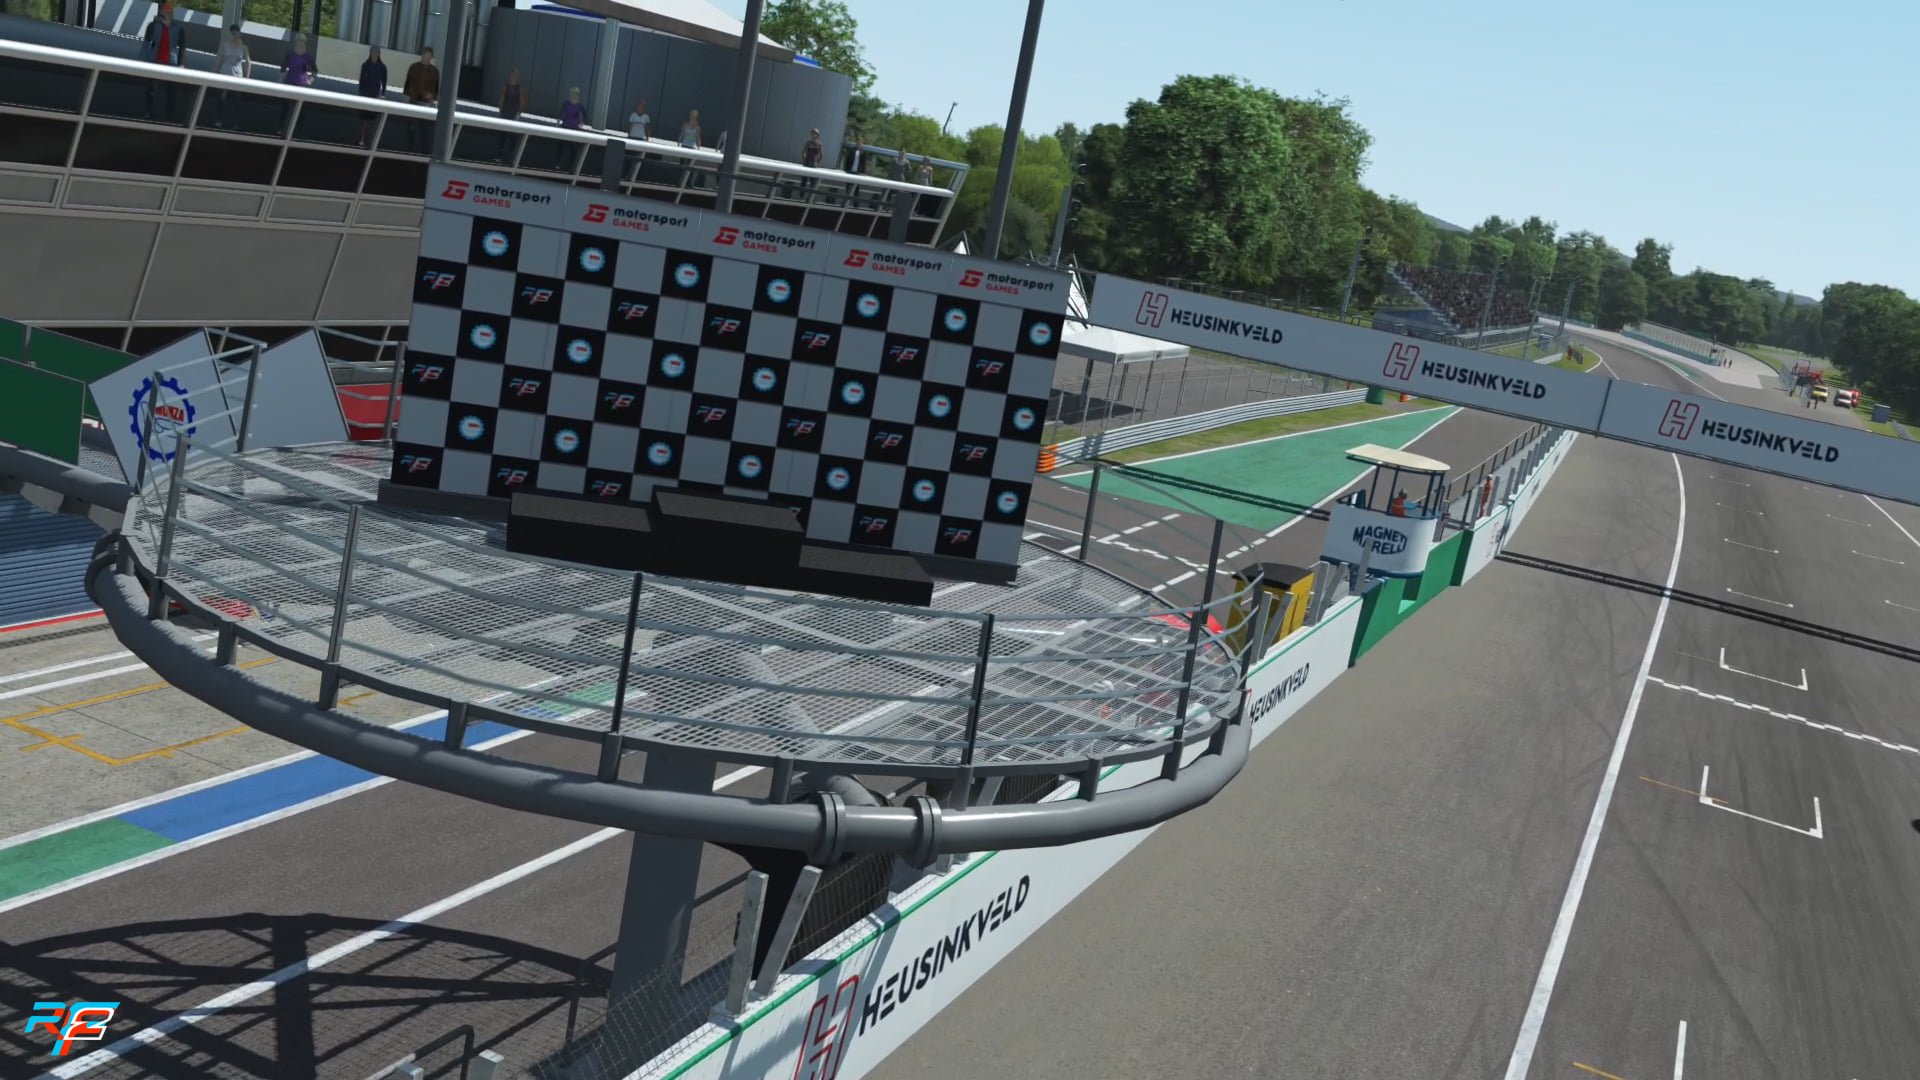 More information about "rFactor 2: dopo la BMW M4, ecco Monza in laser scan!"